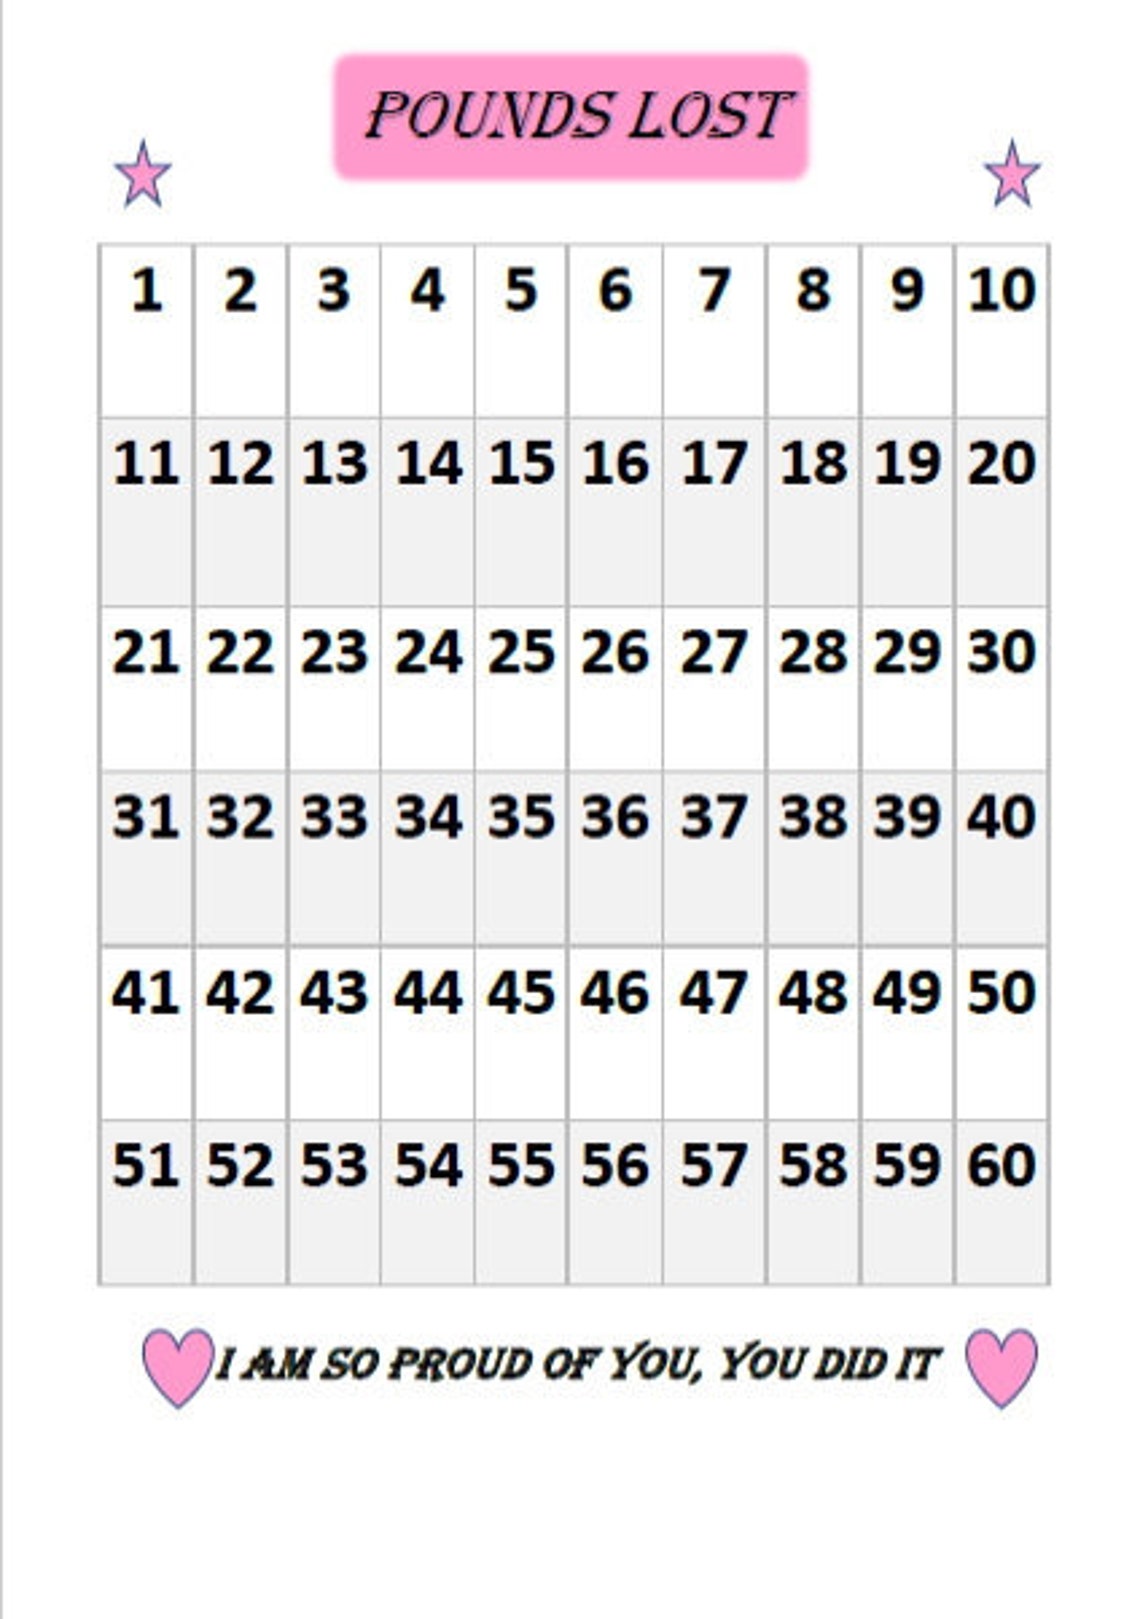 weight-loss-pounds-lost-chart-etsy